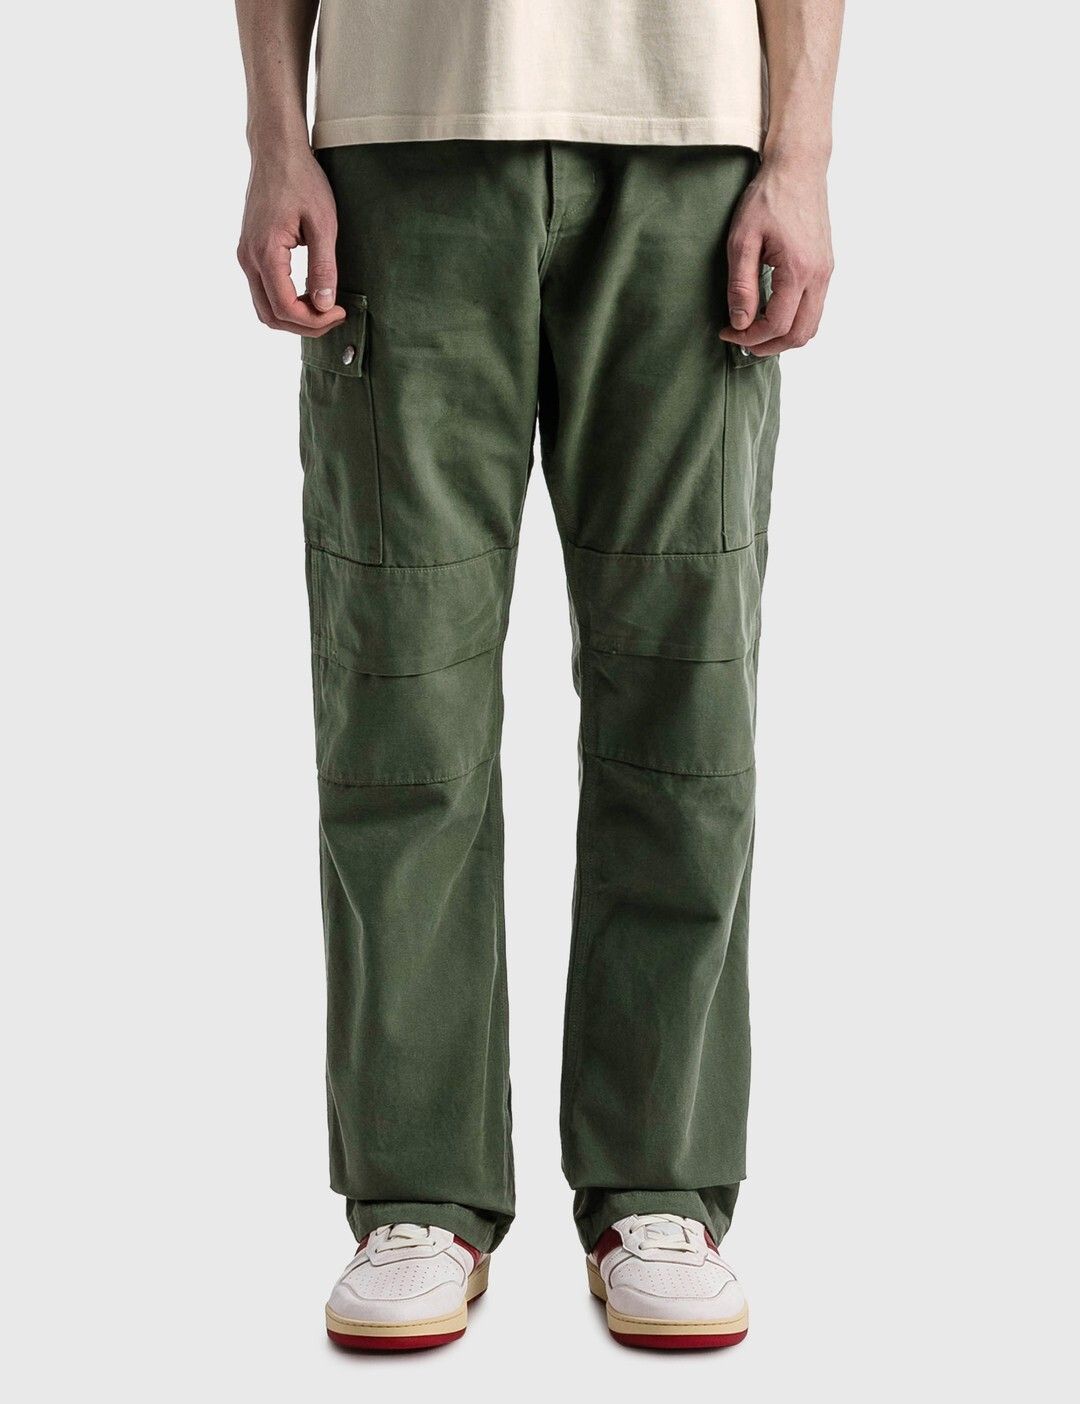 Pre-owned Reese Cooper Organic Dye Cargo Pants Trousers Green Olive 30